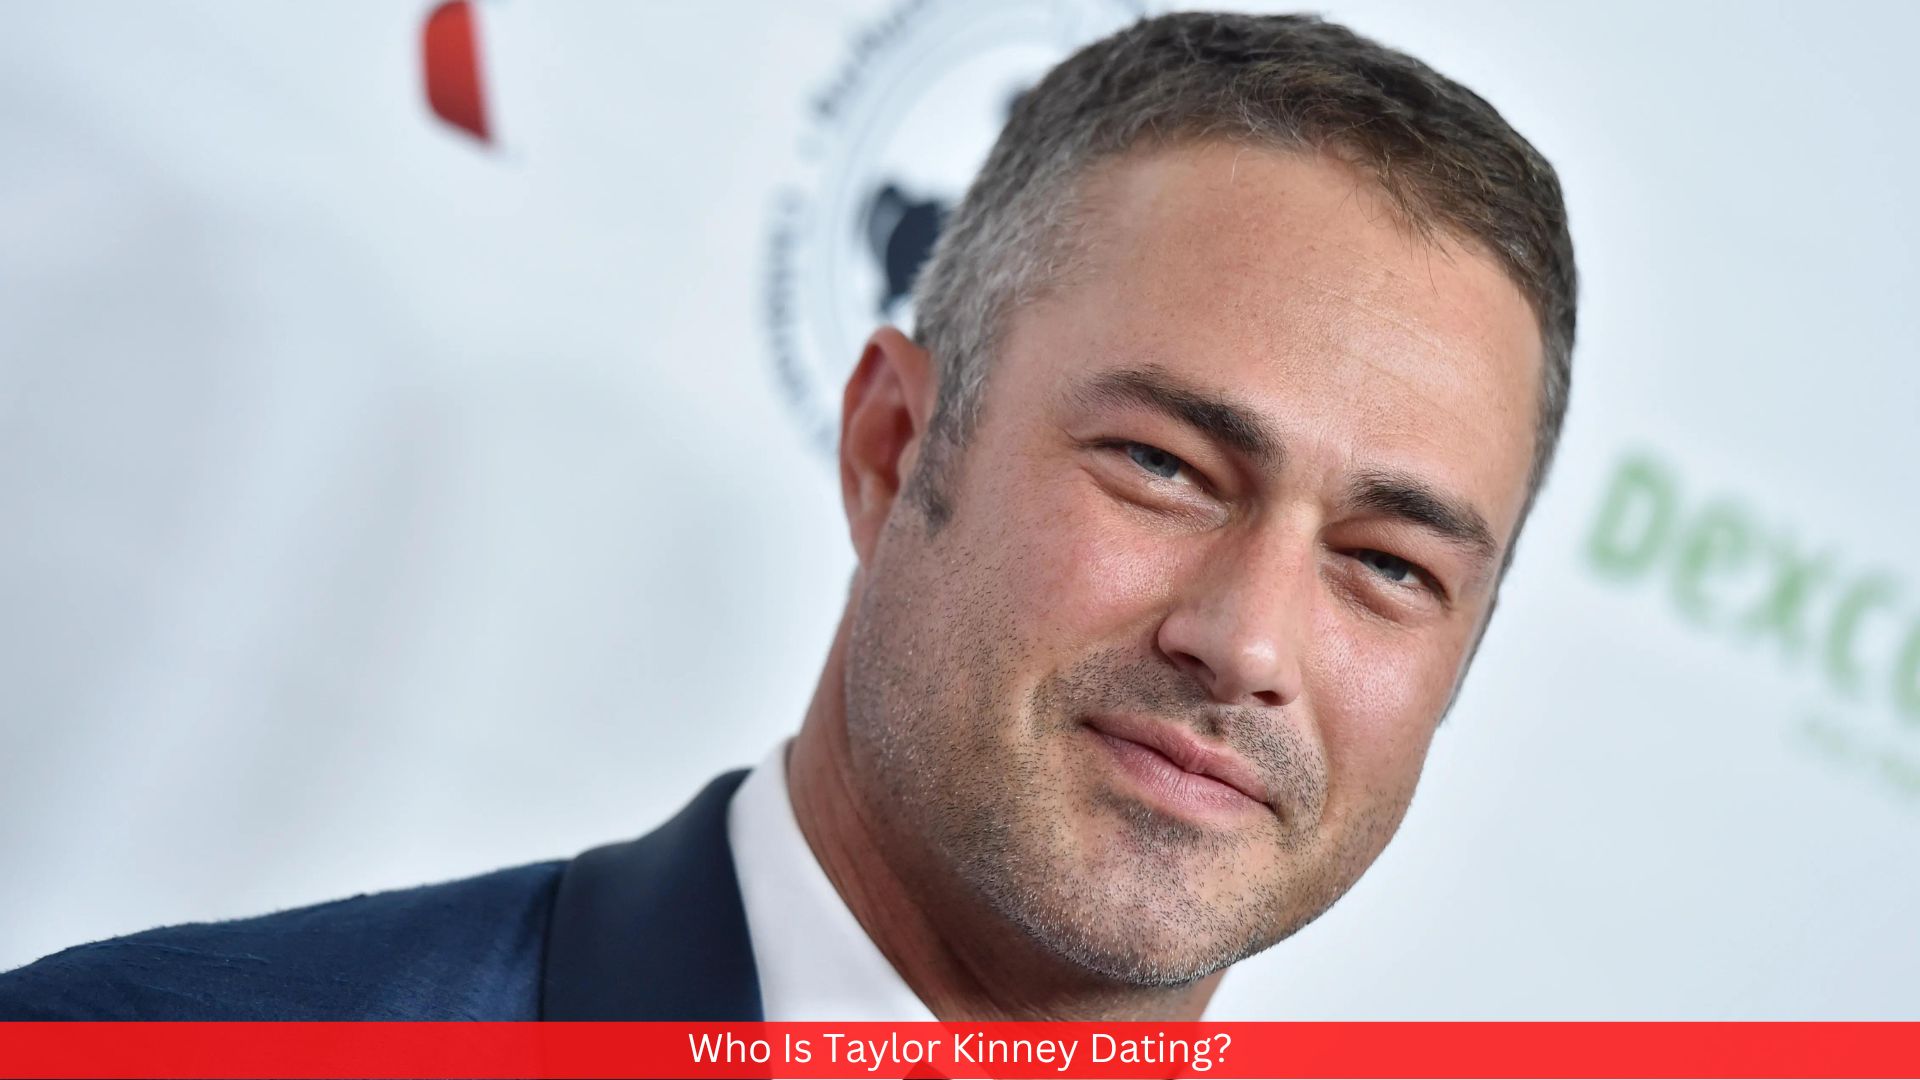 Who Is Taylor Kinney Dating?